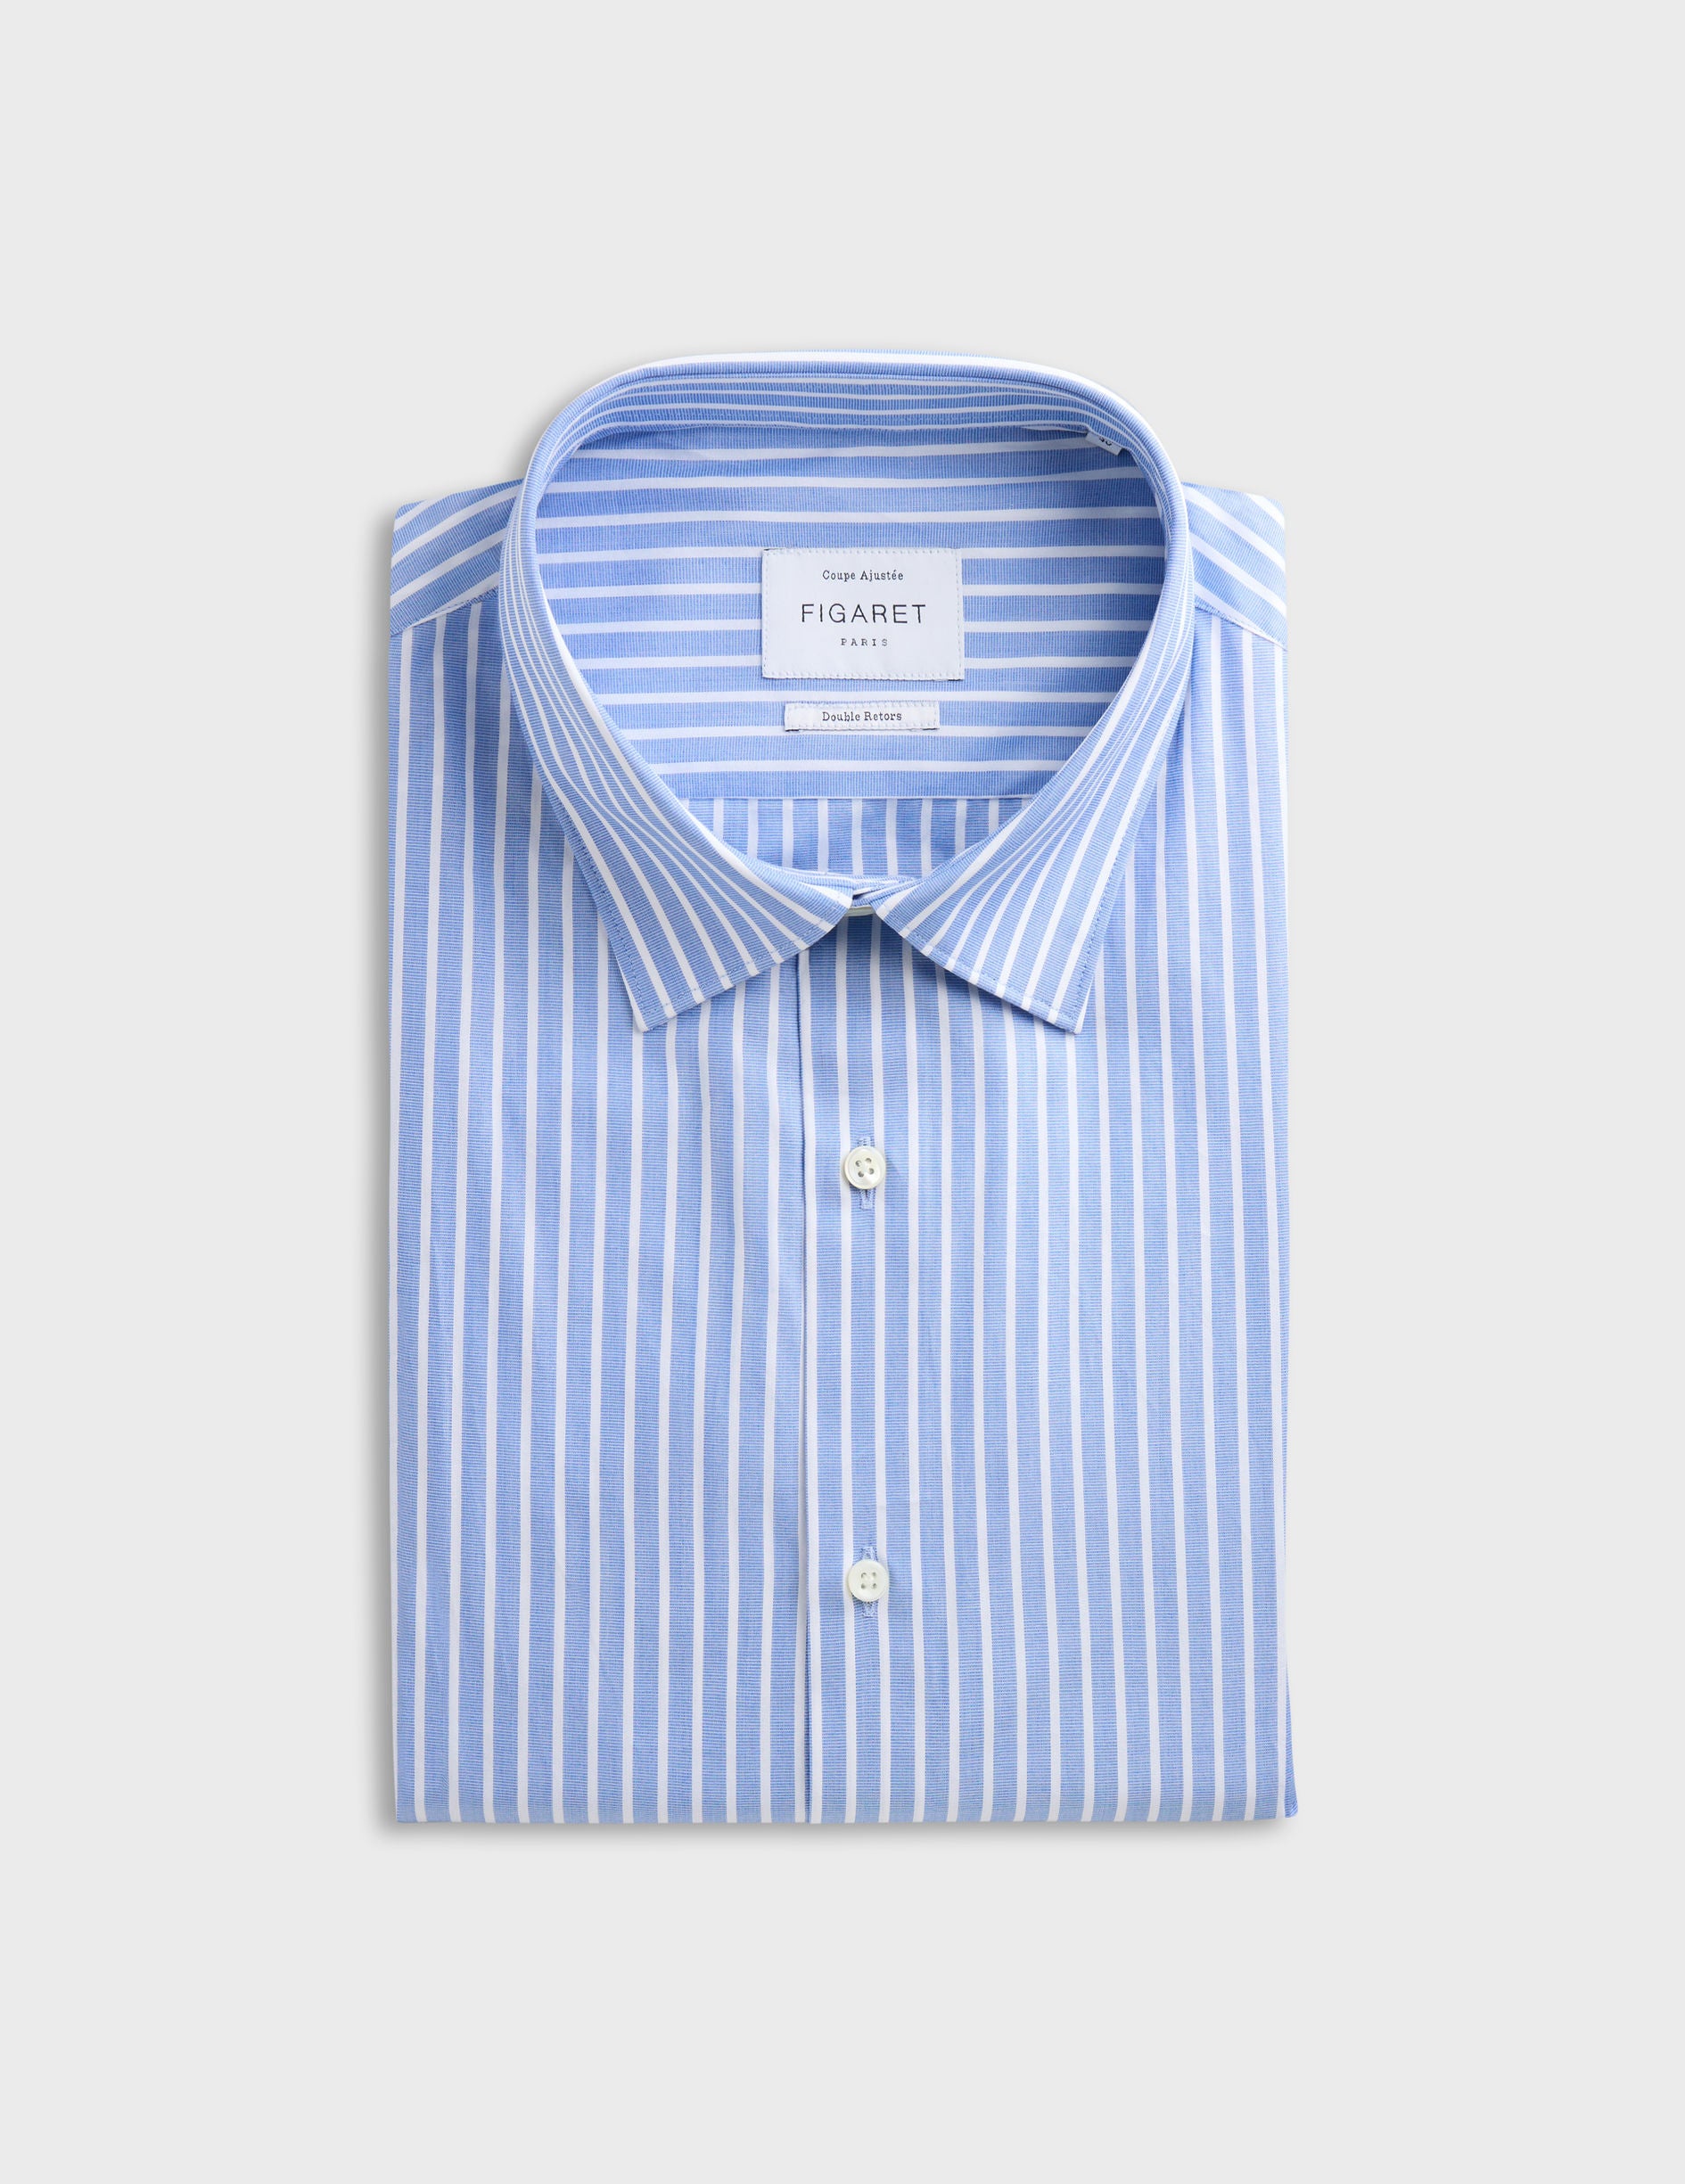 Fitted blue striped shirt - Wire to wire - Figaret Collar